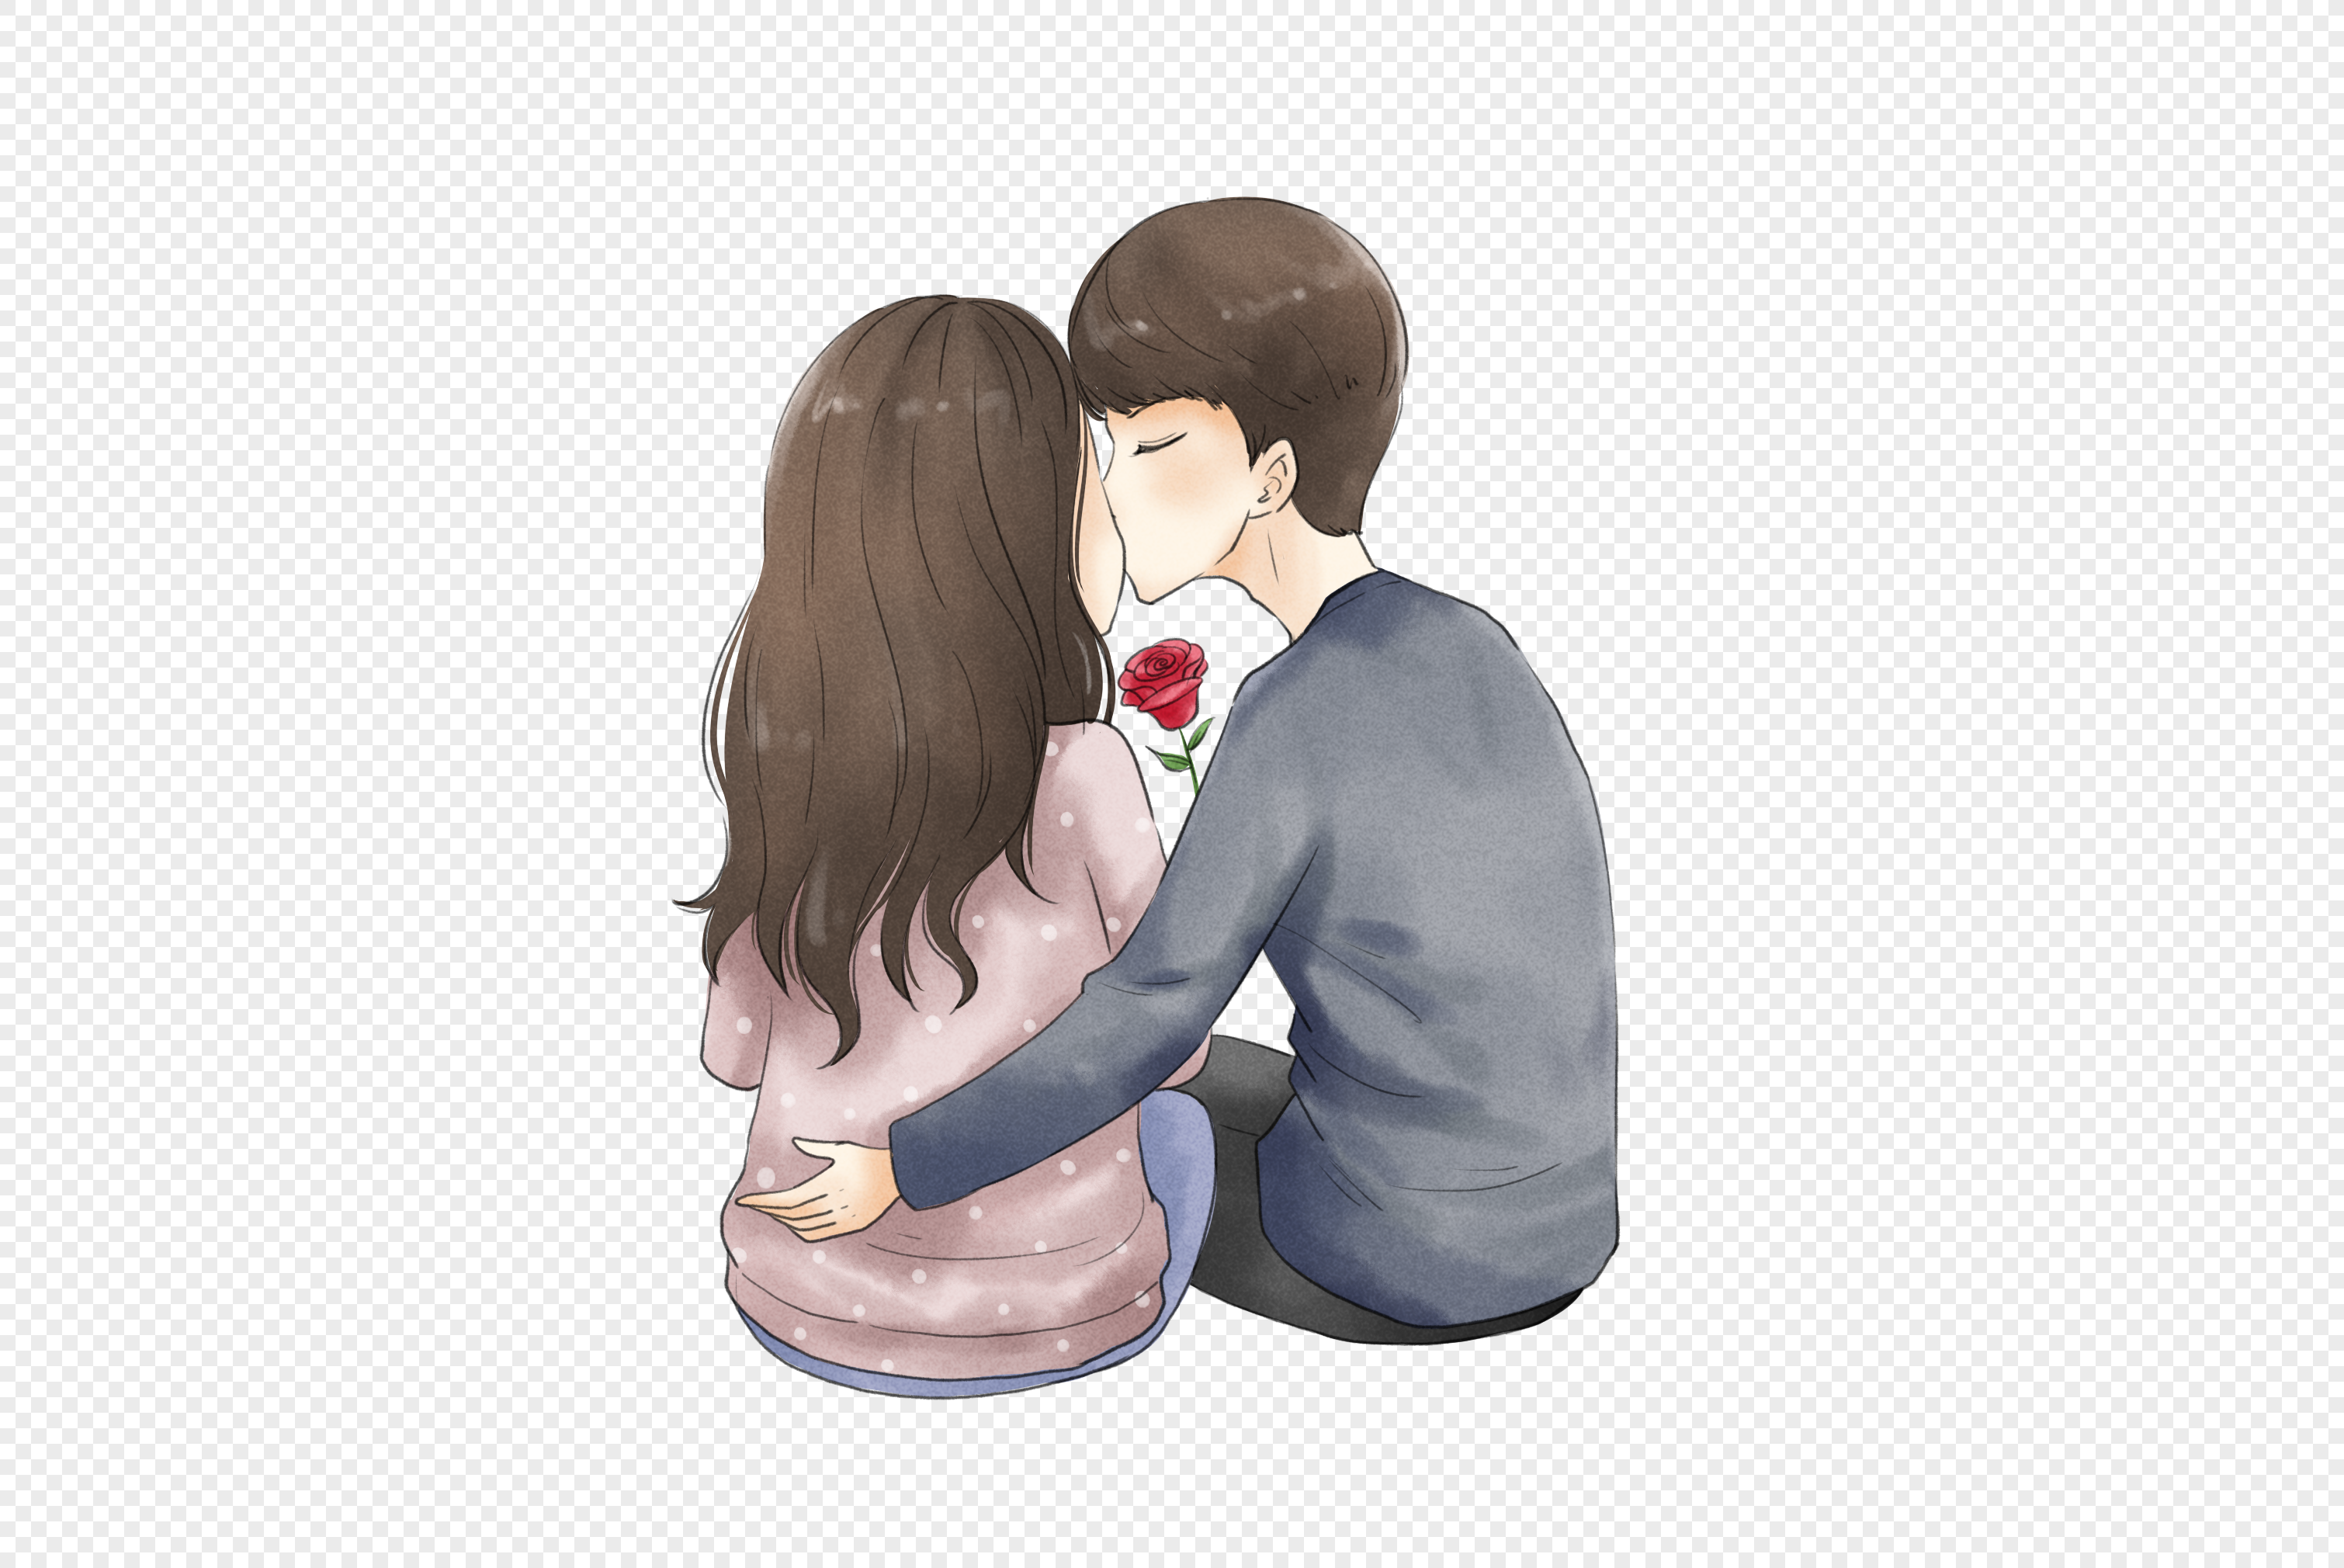 Couple Kiss PNG Picture, Couple Kiss Cartoon Anime Style, Sweet